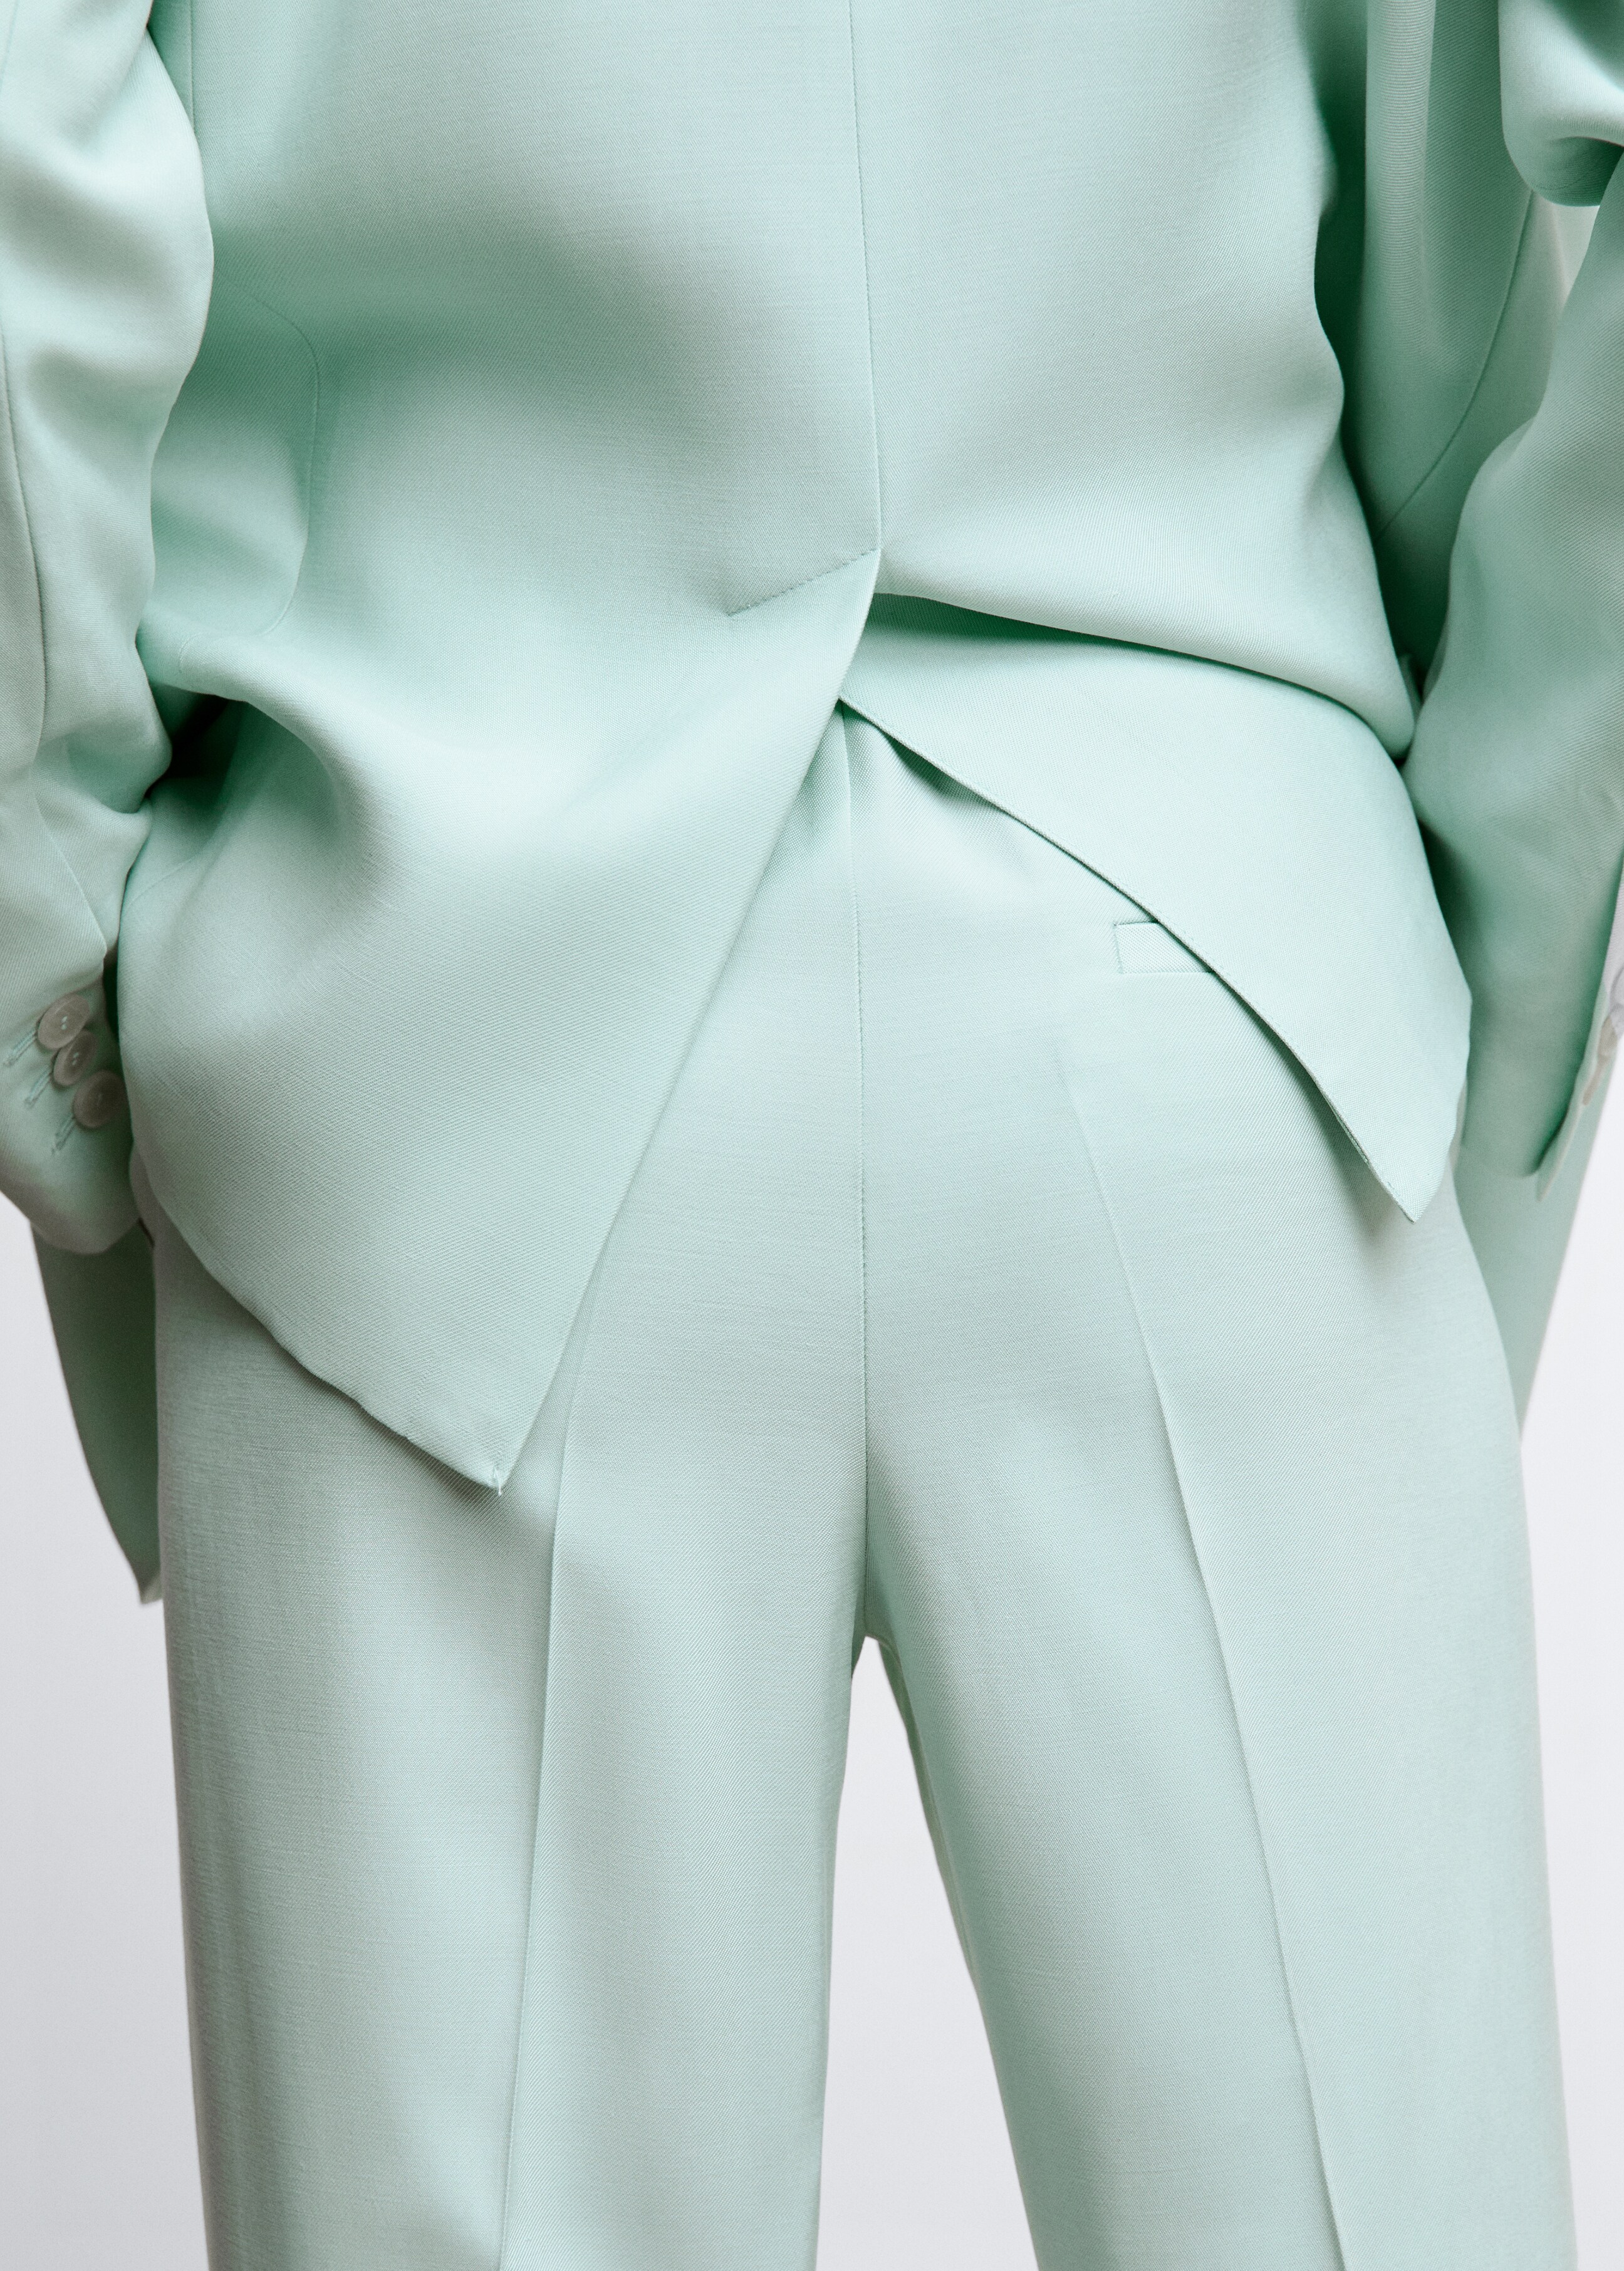 Straight suit trousers - Details of the article 6